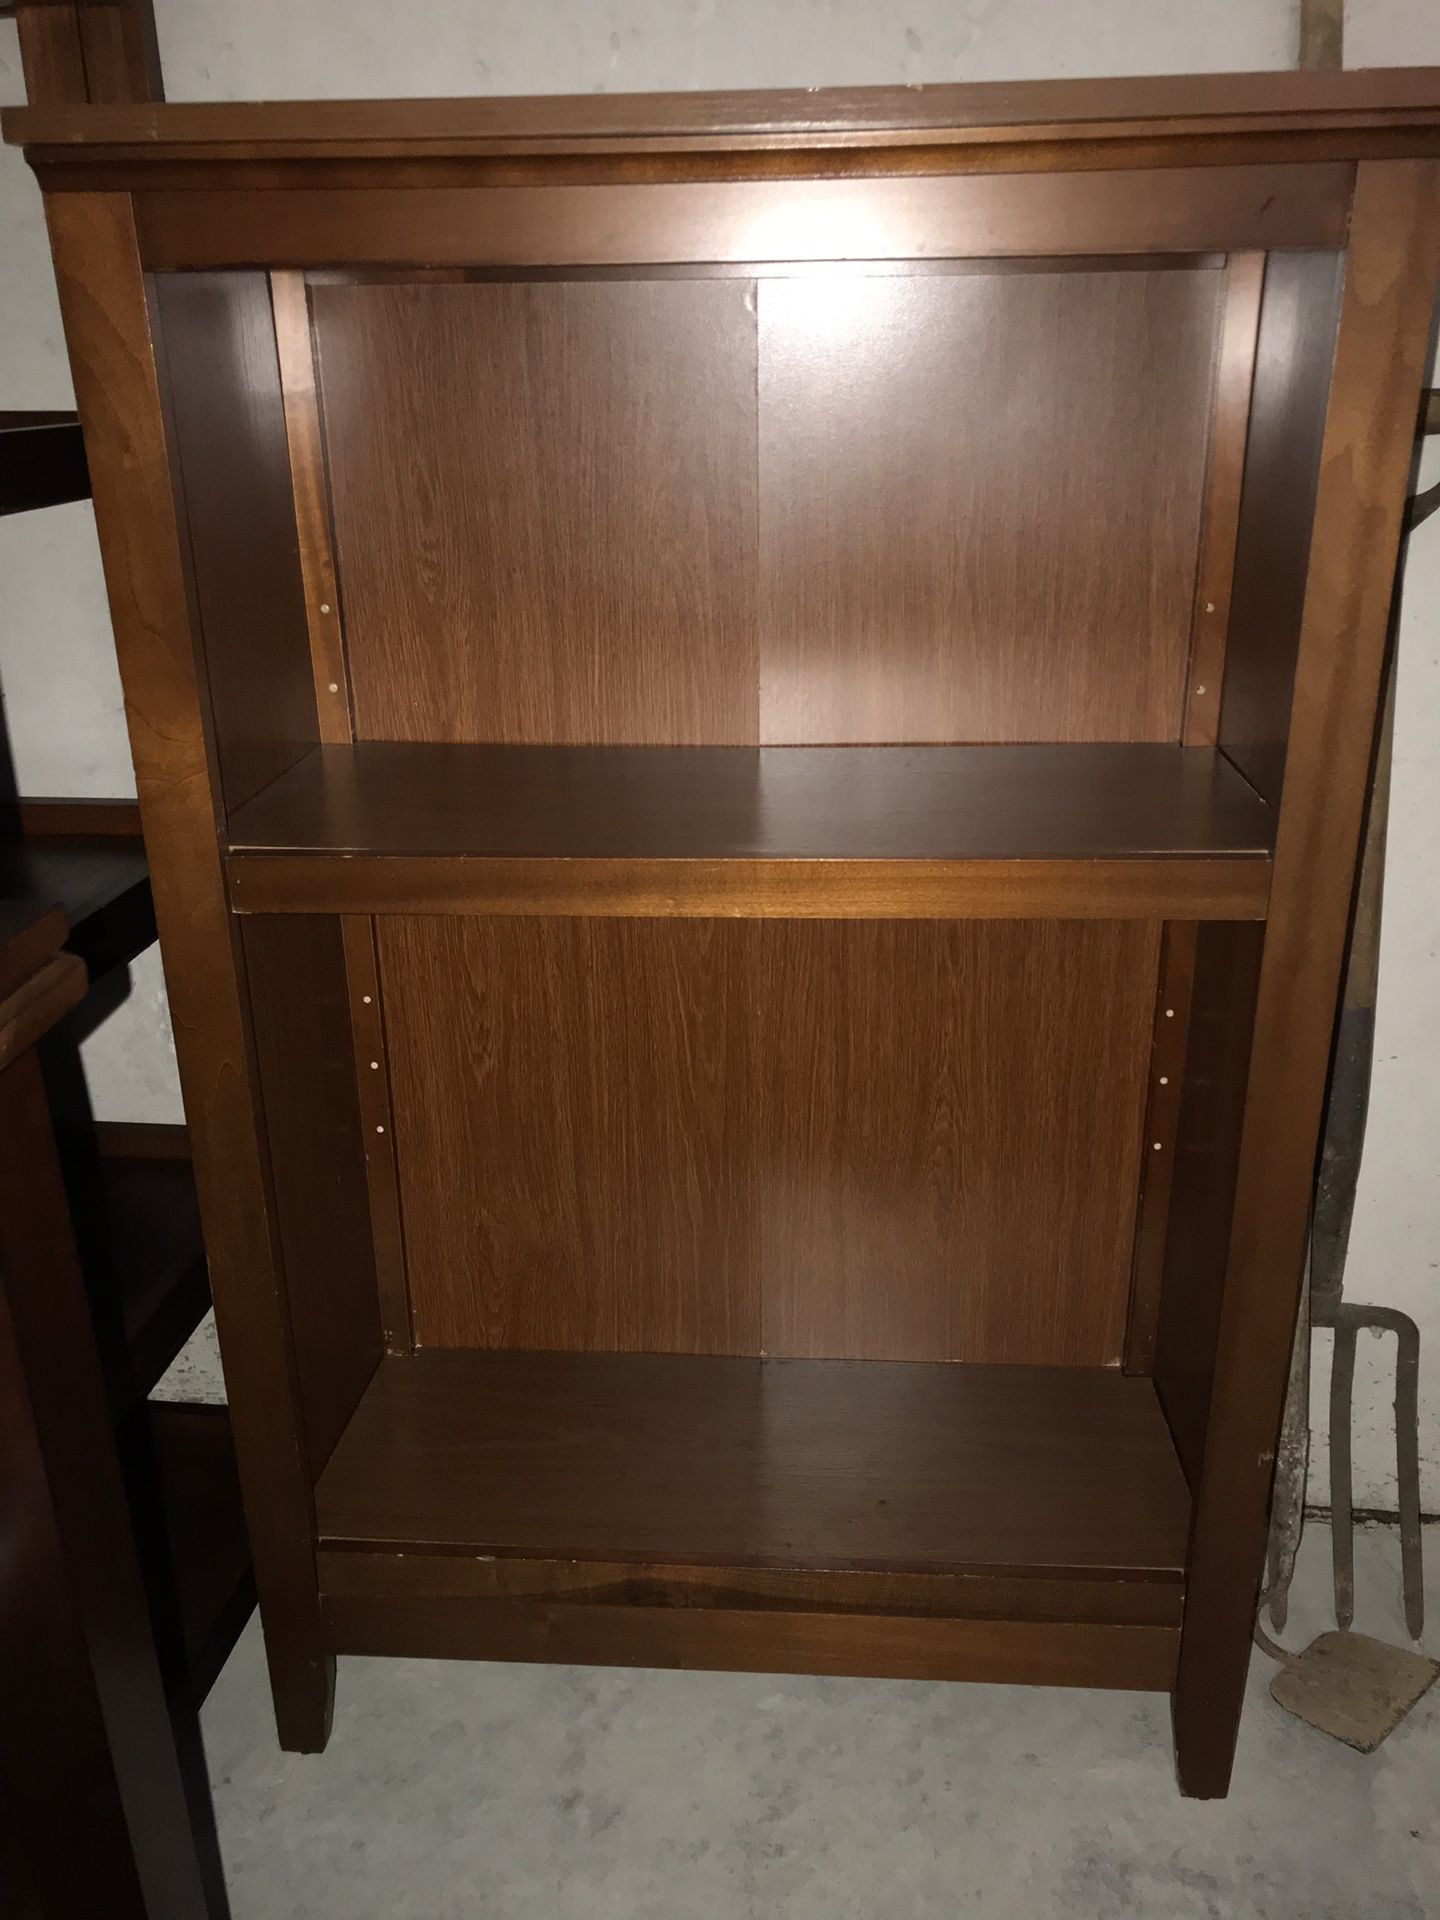 Cherry finish book shelves in great condition!